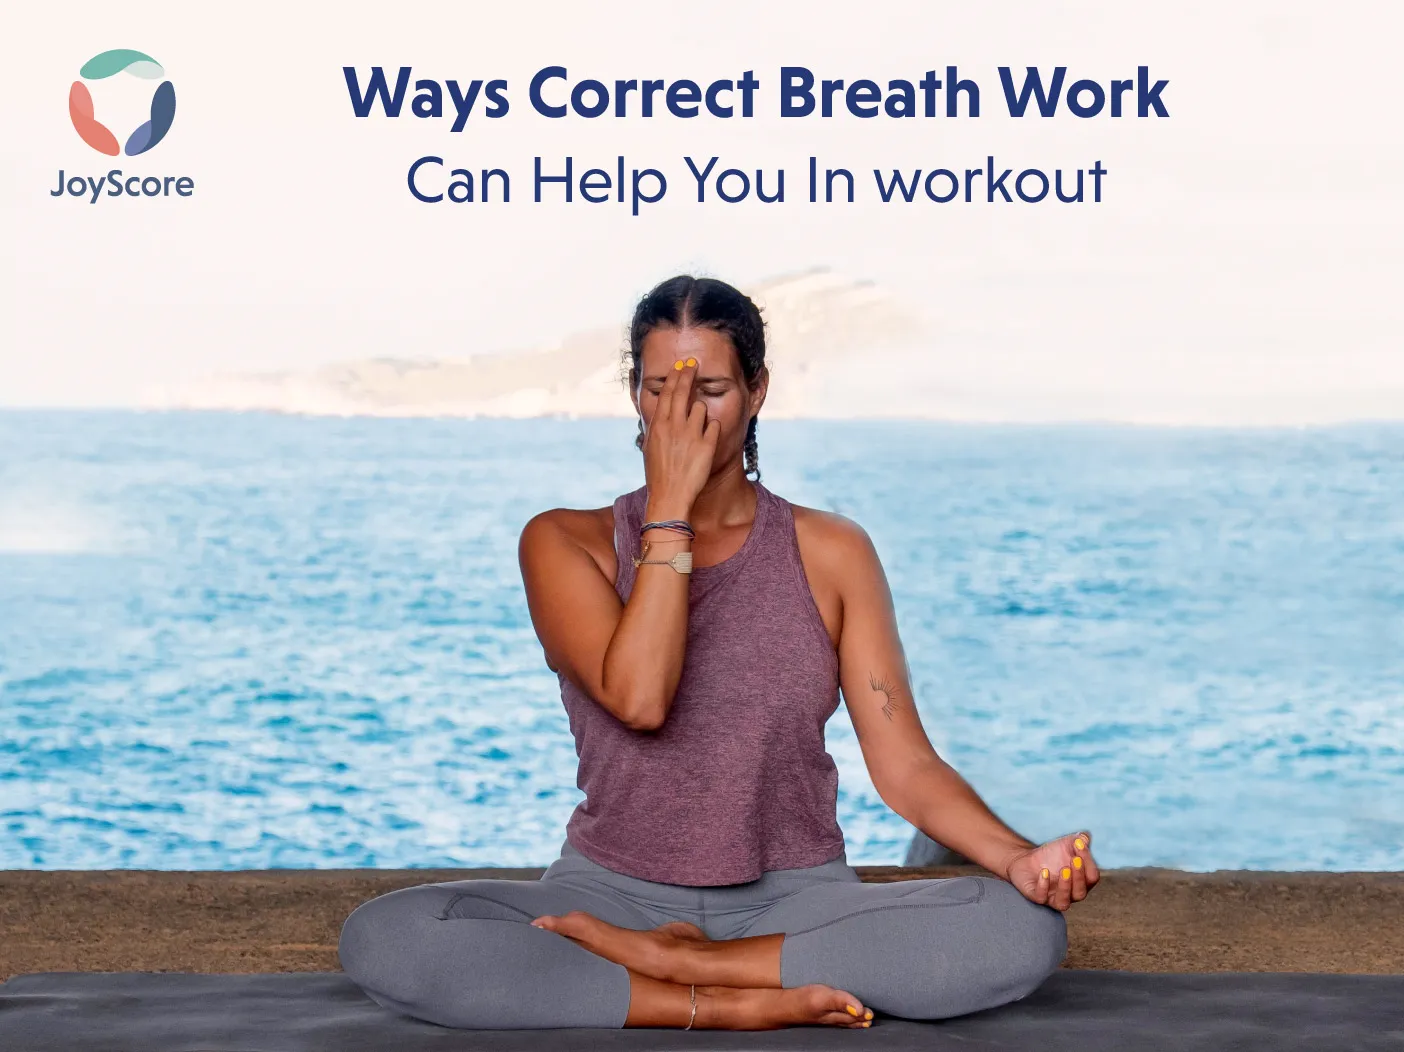 How the correct breath work can take you further in your workout